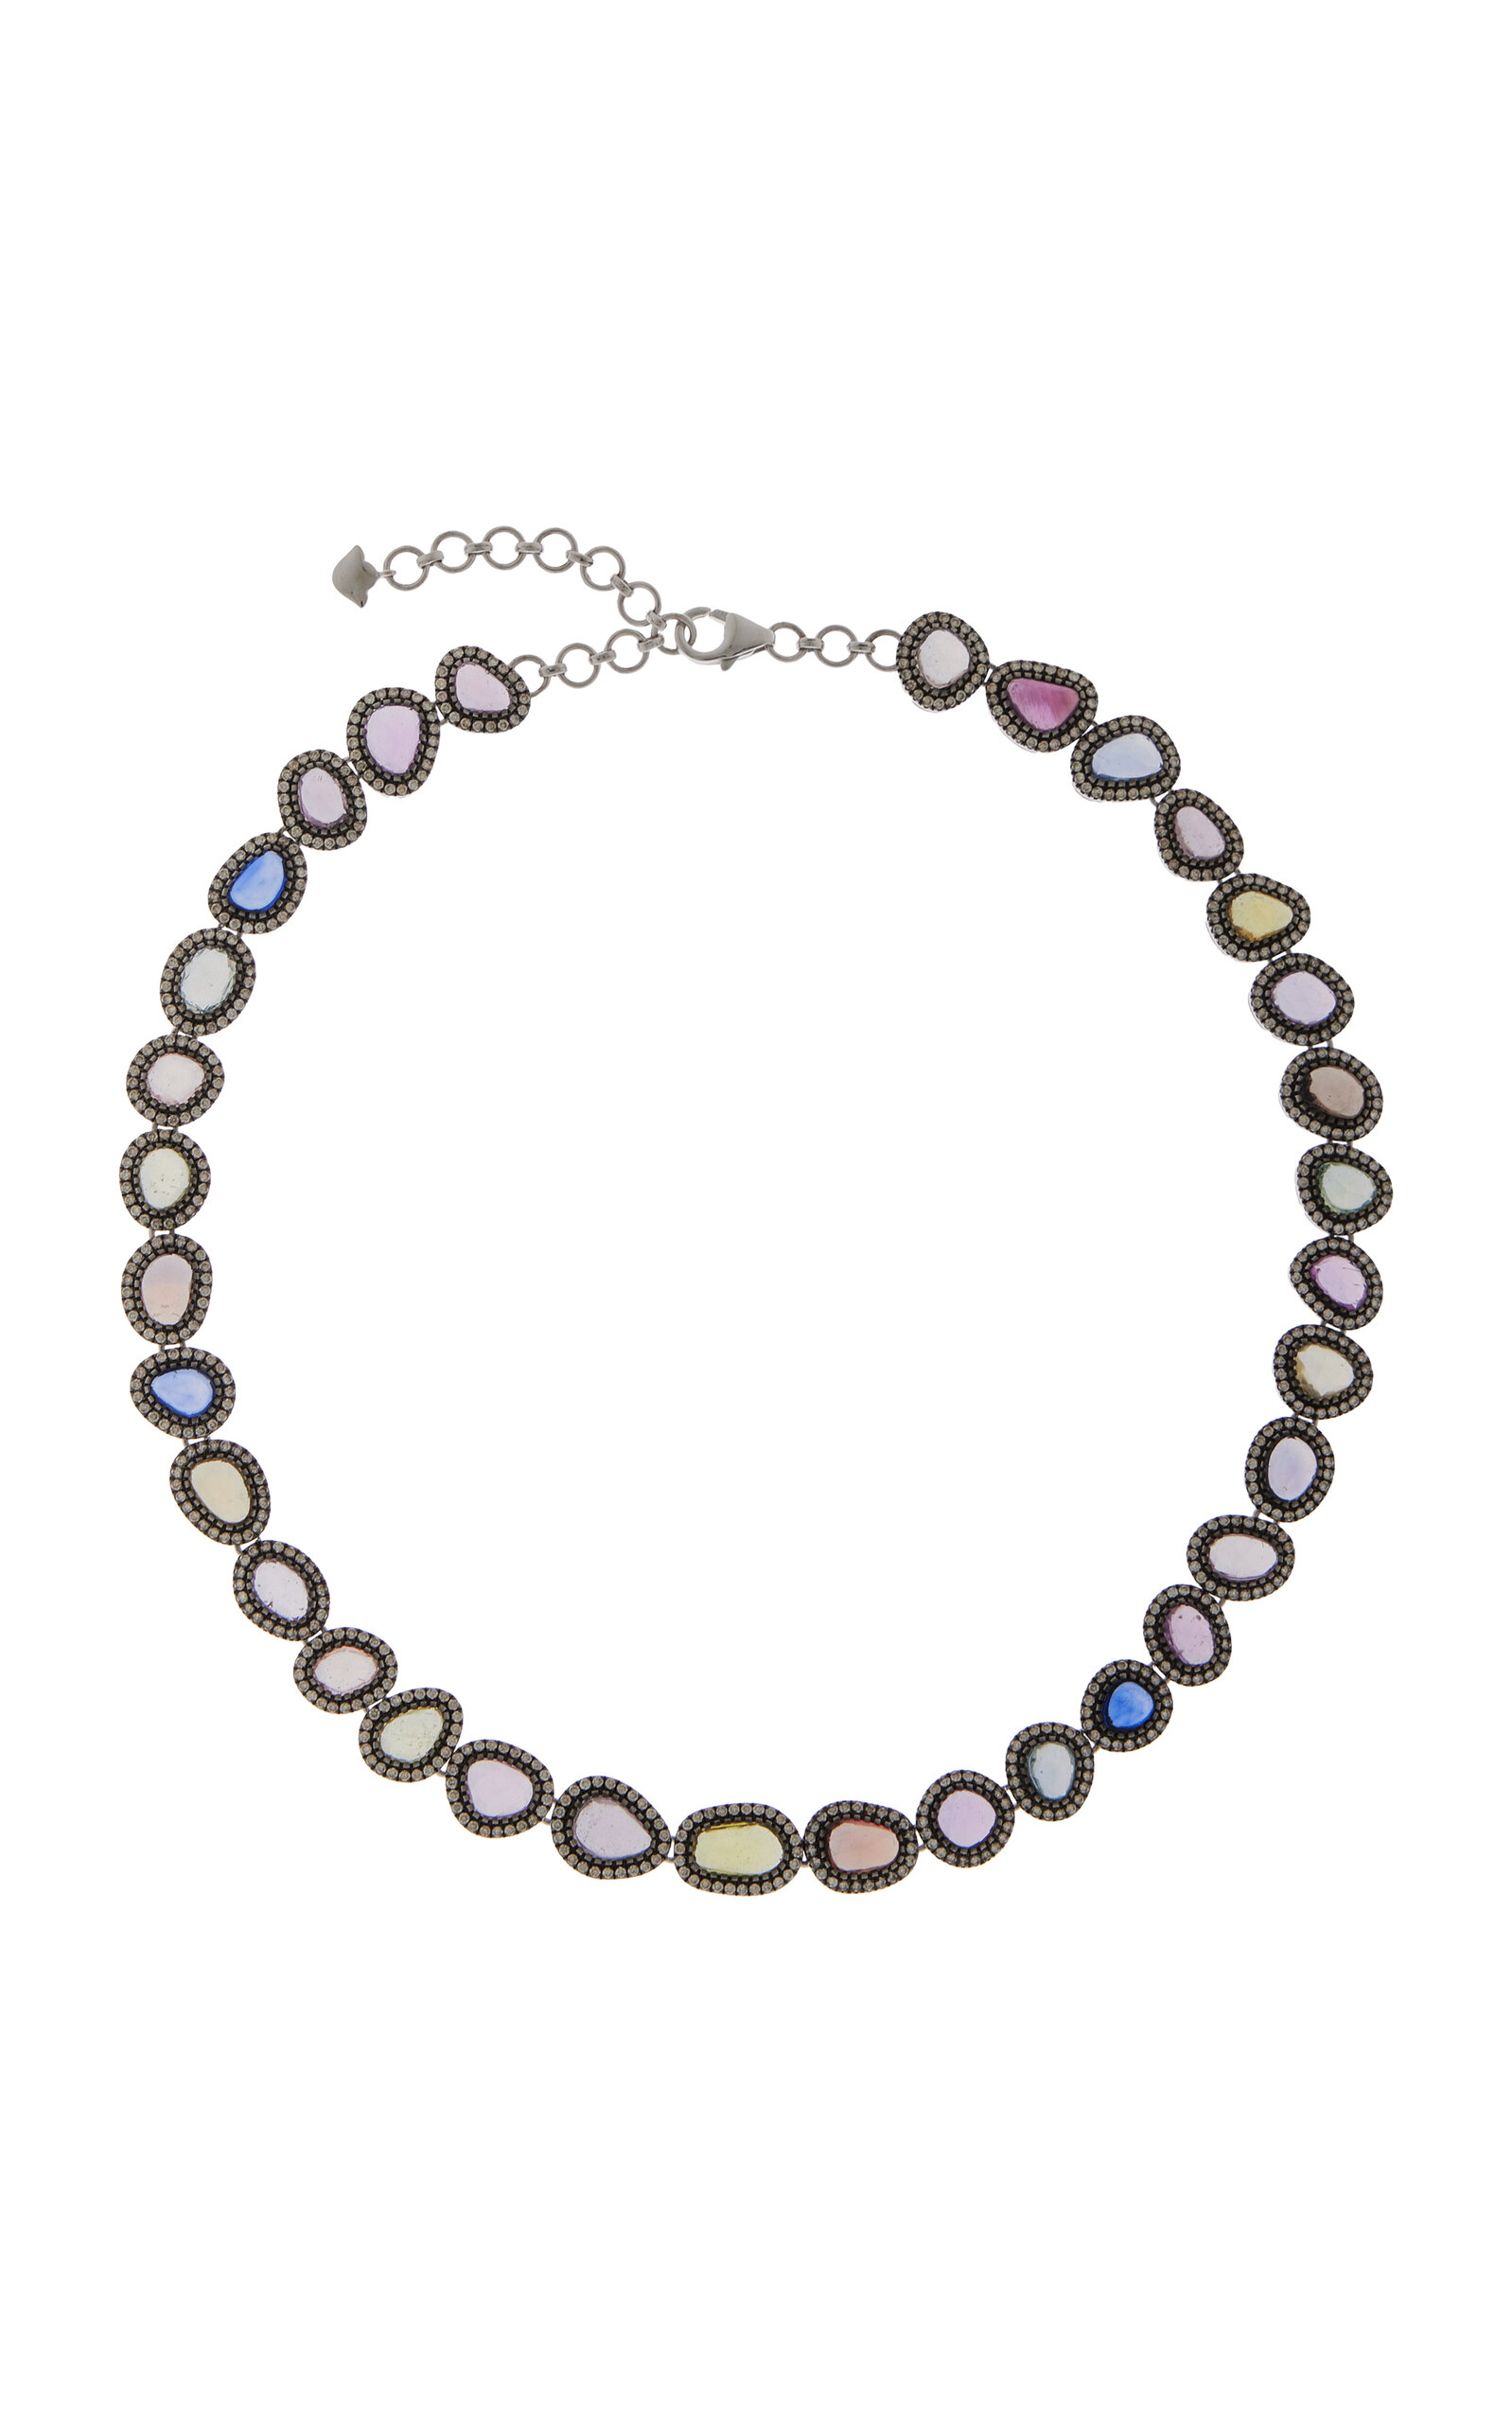 One-of-a-Kind Midnight Blossom 18K White Gold Sapphire Necklace